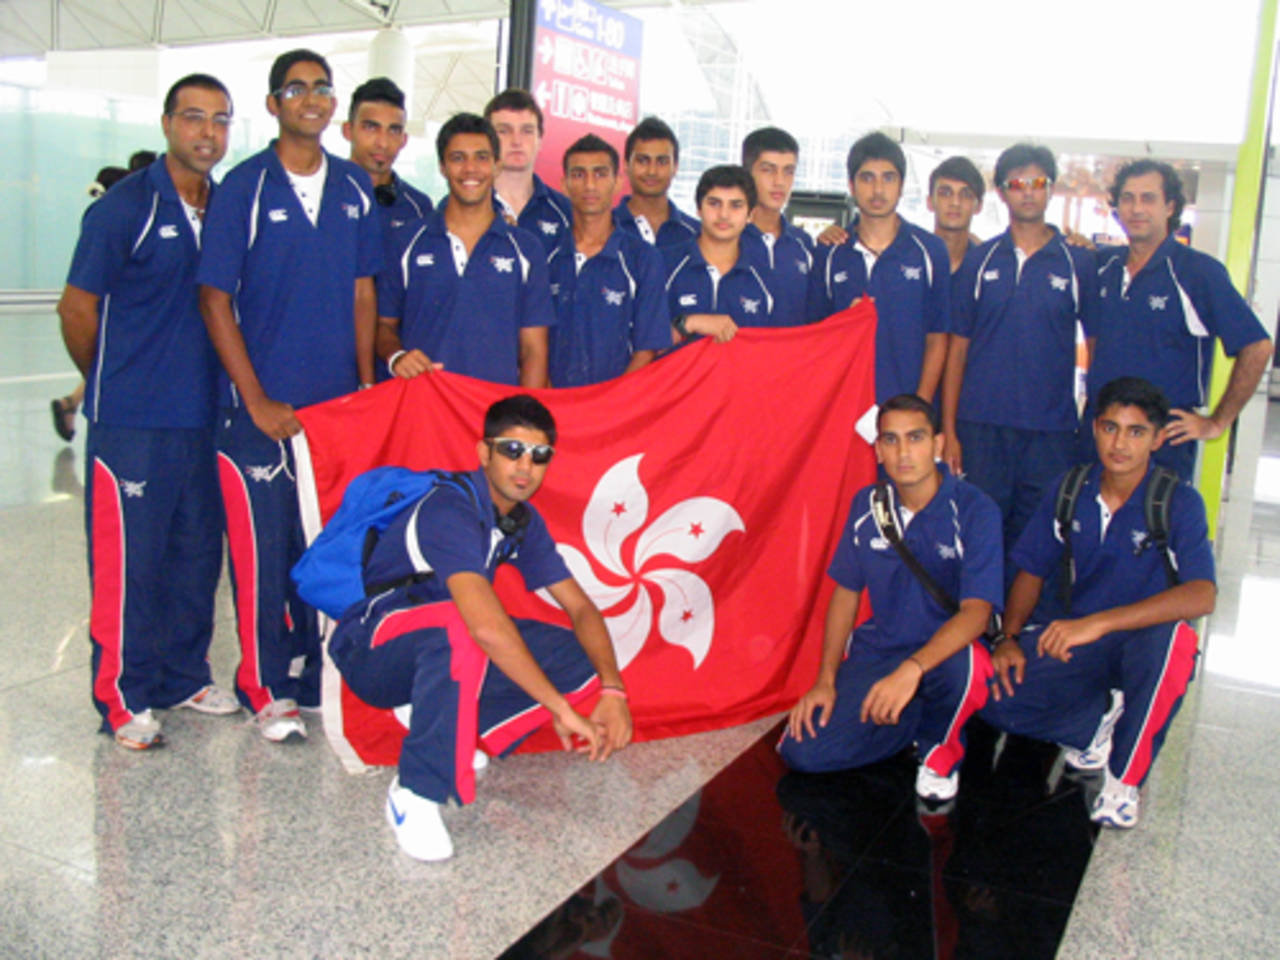 The Hong Kong squad for the ICC Under-19 Cricket World Cup Qualifier awaits their flight to Canada